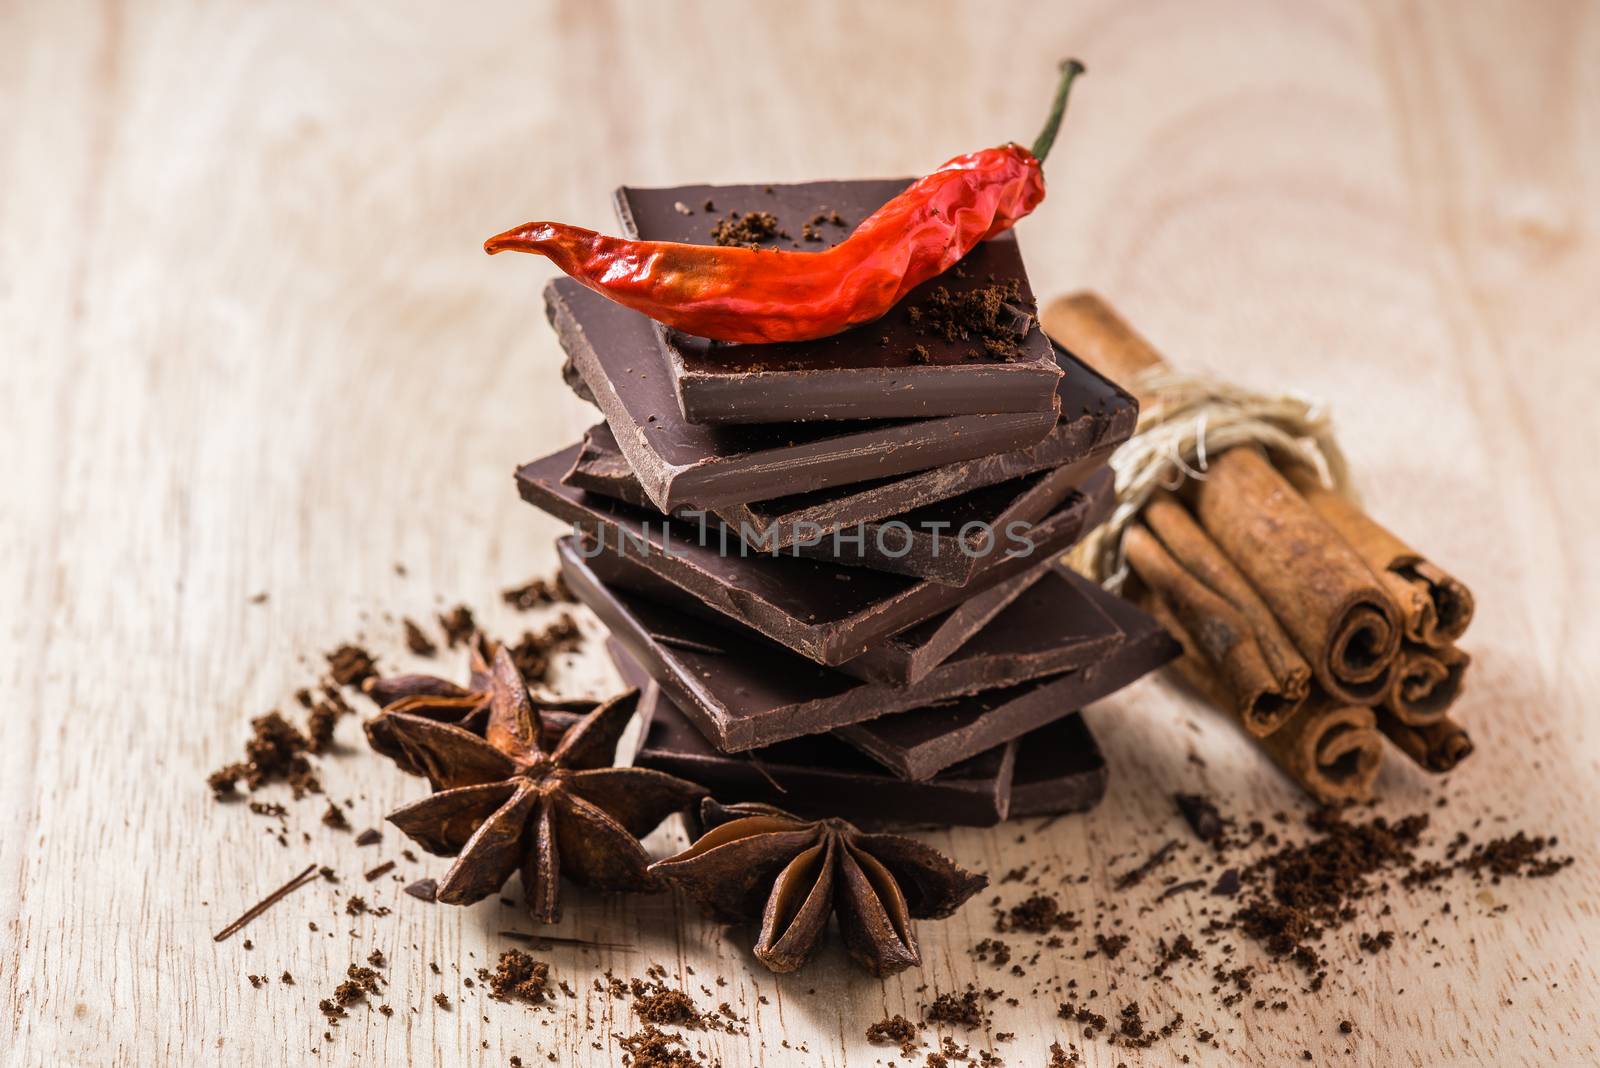 Chocolate with Red Chili Pepper, Anise Star and Cinnamon